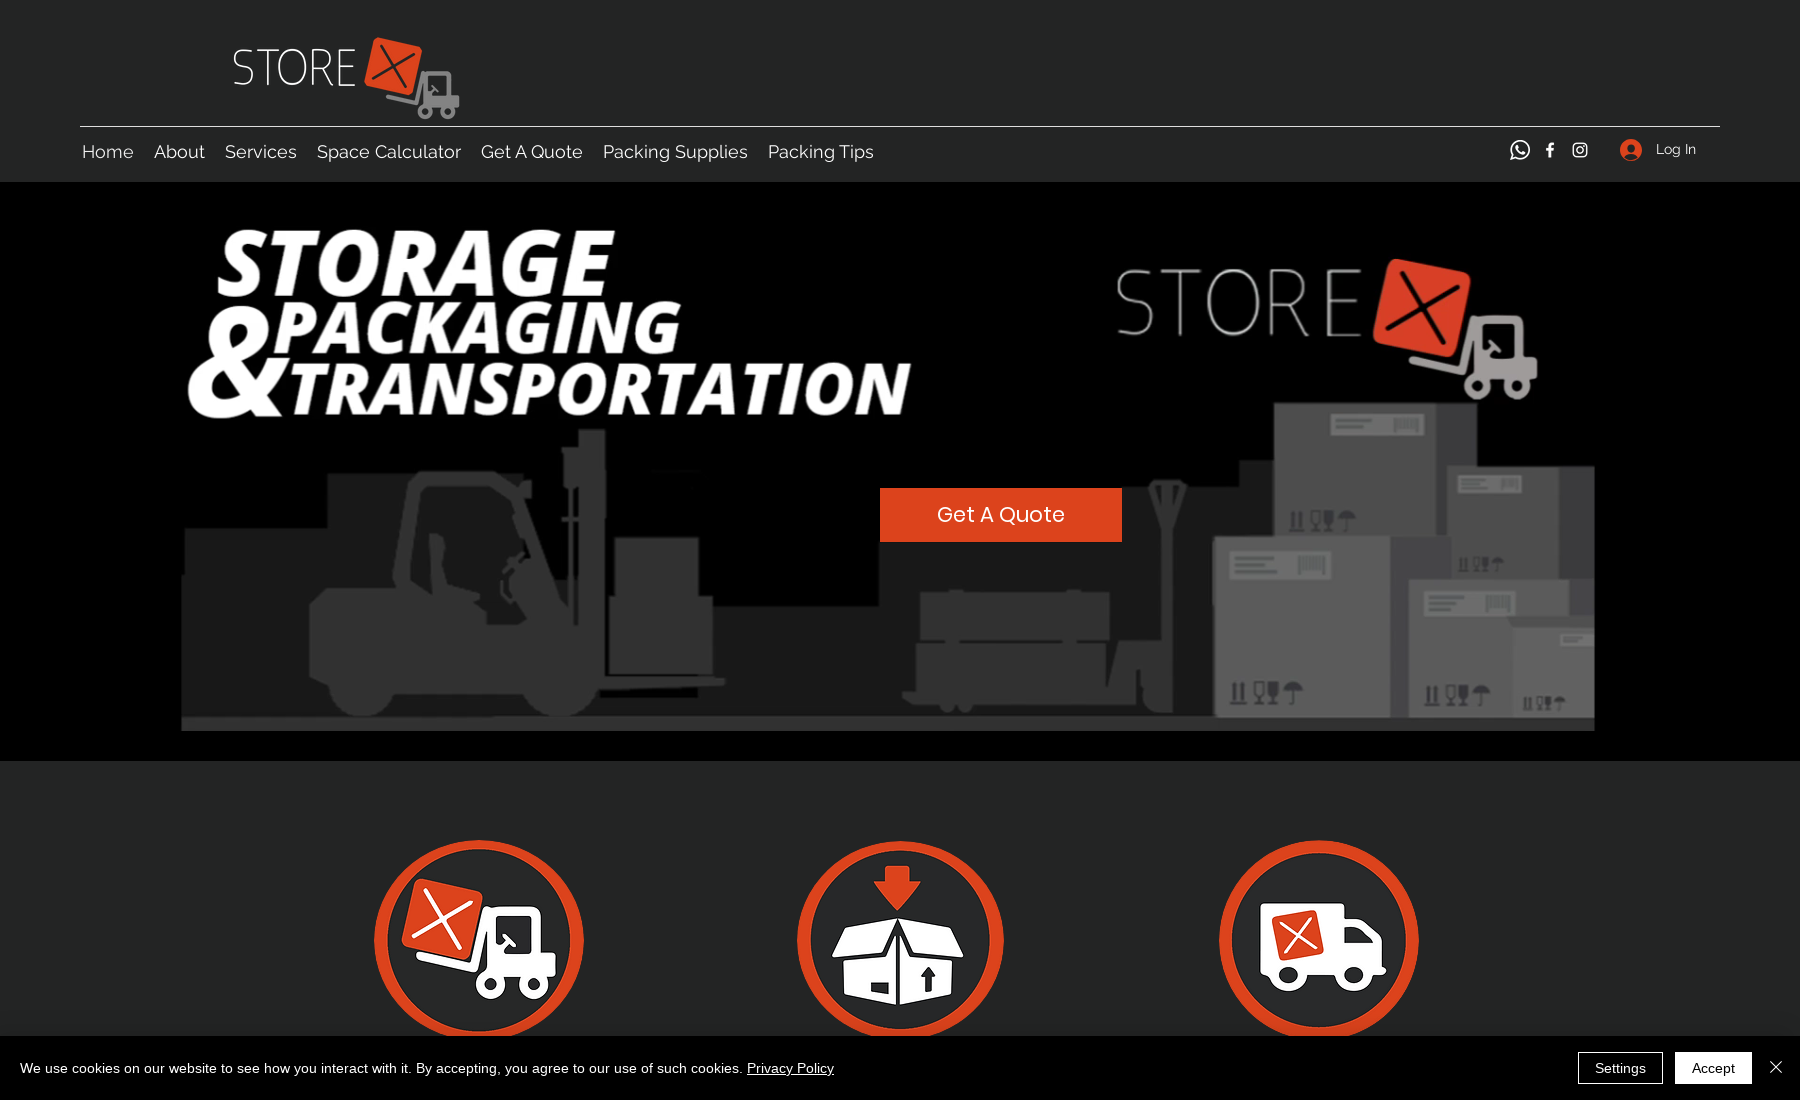 Storex: StoreX offers full logistics when it comes to domestic and business storage, packaging, distribution, and transportation both locally and overseas.